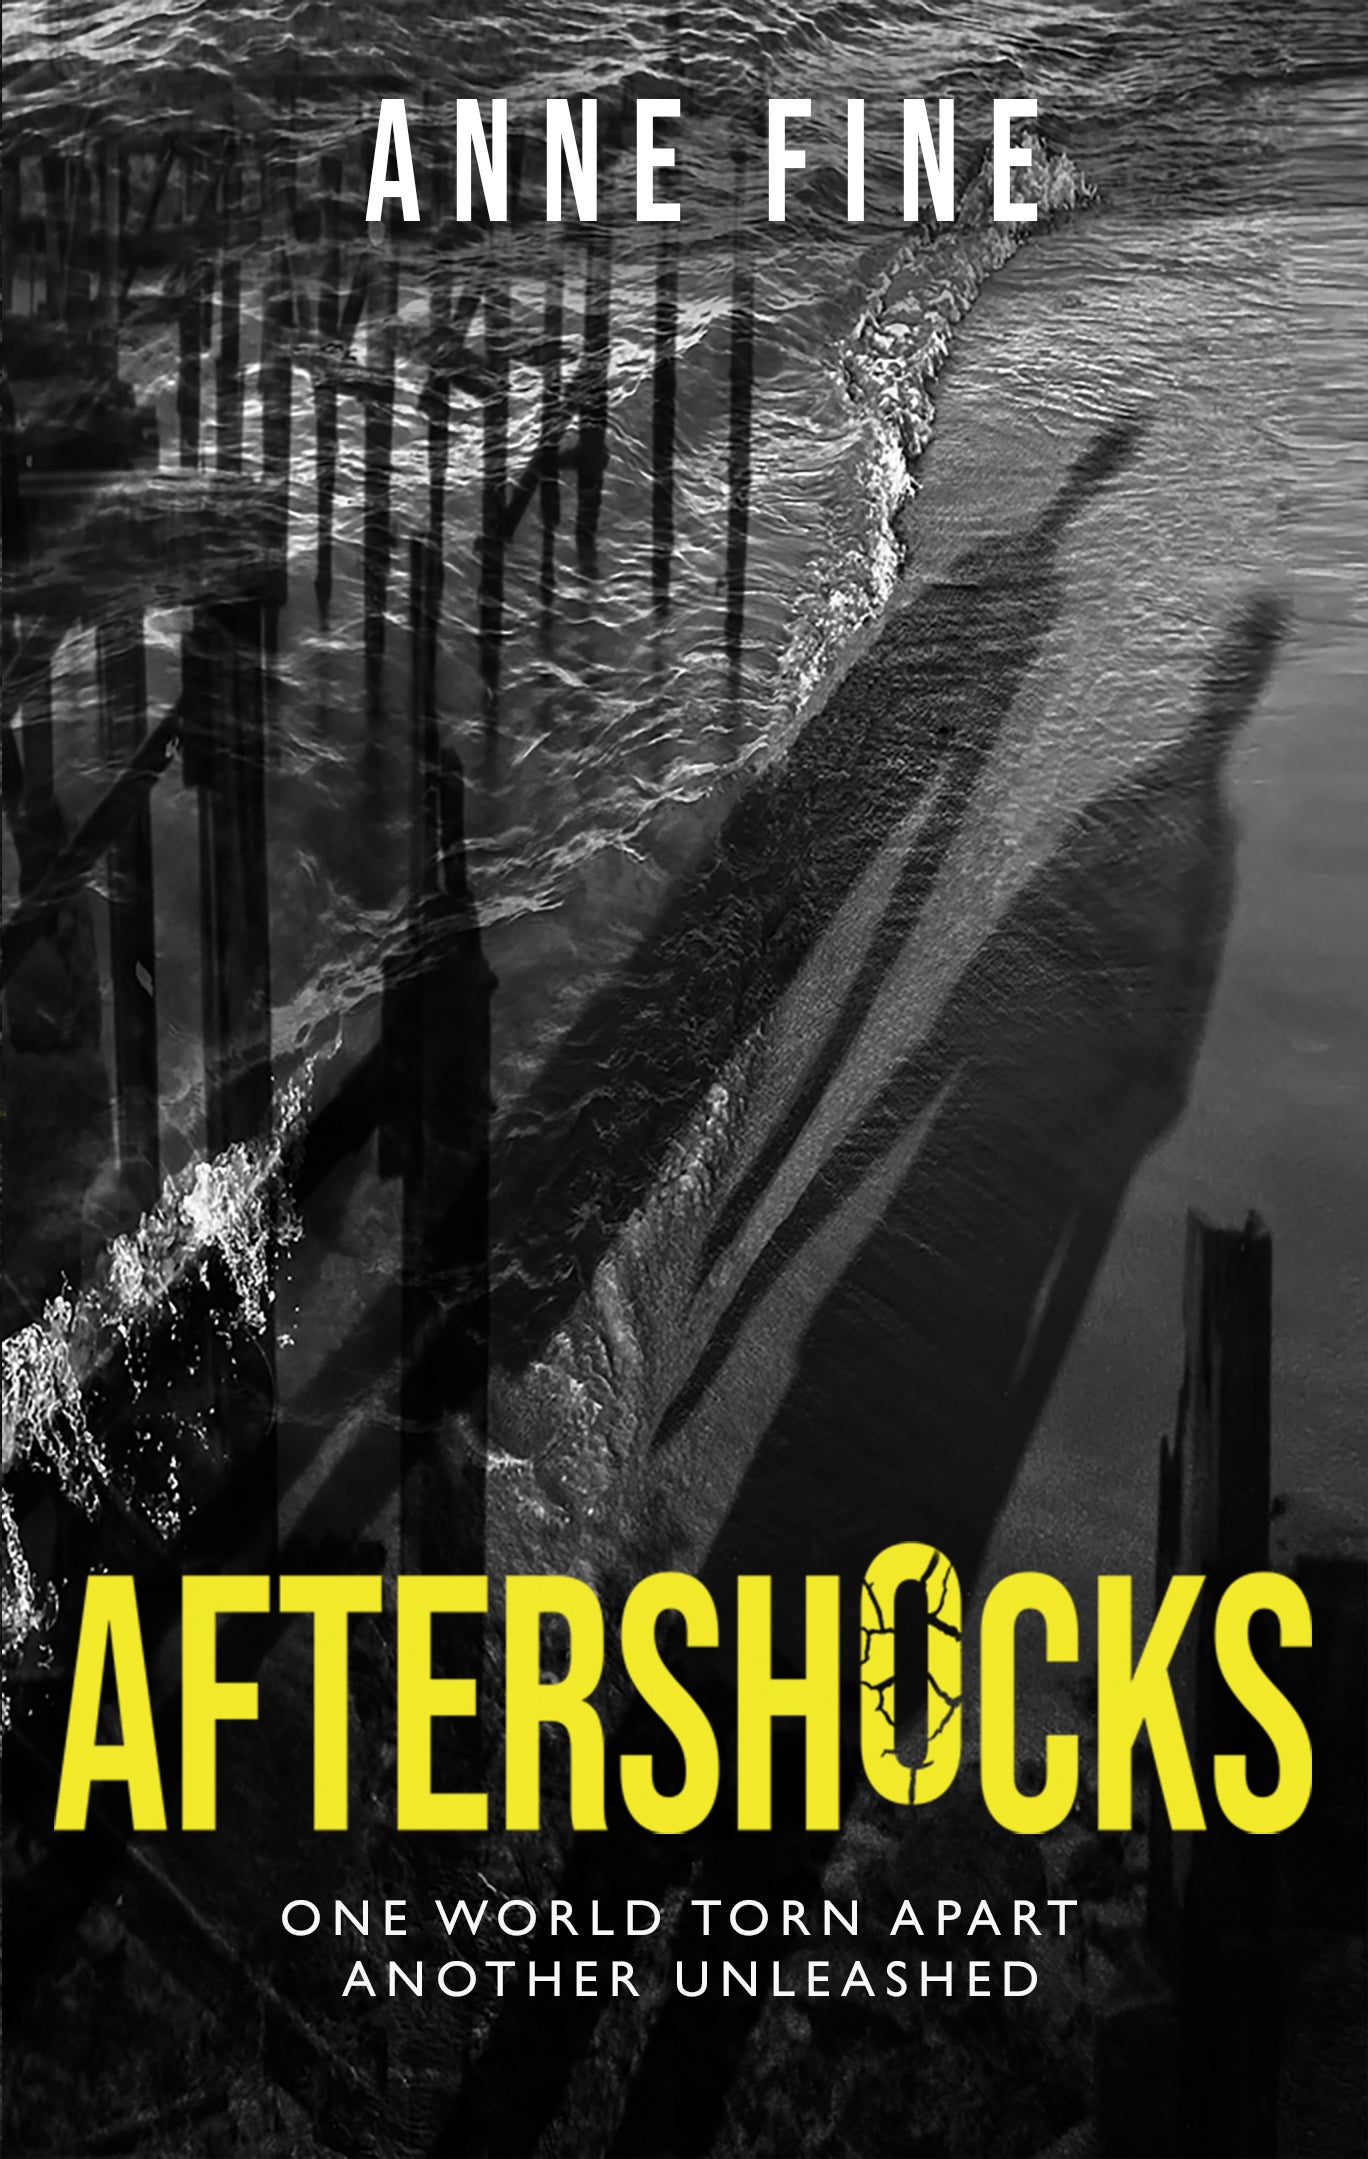 Her new children’s book ‘Aftershocks’ deals with ‘the horribly difficult subject’ of grief